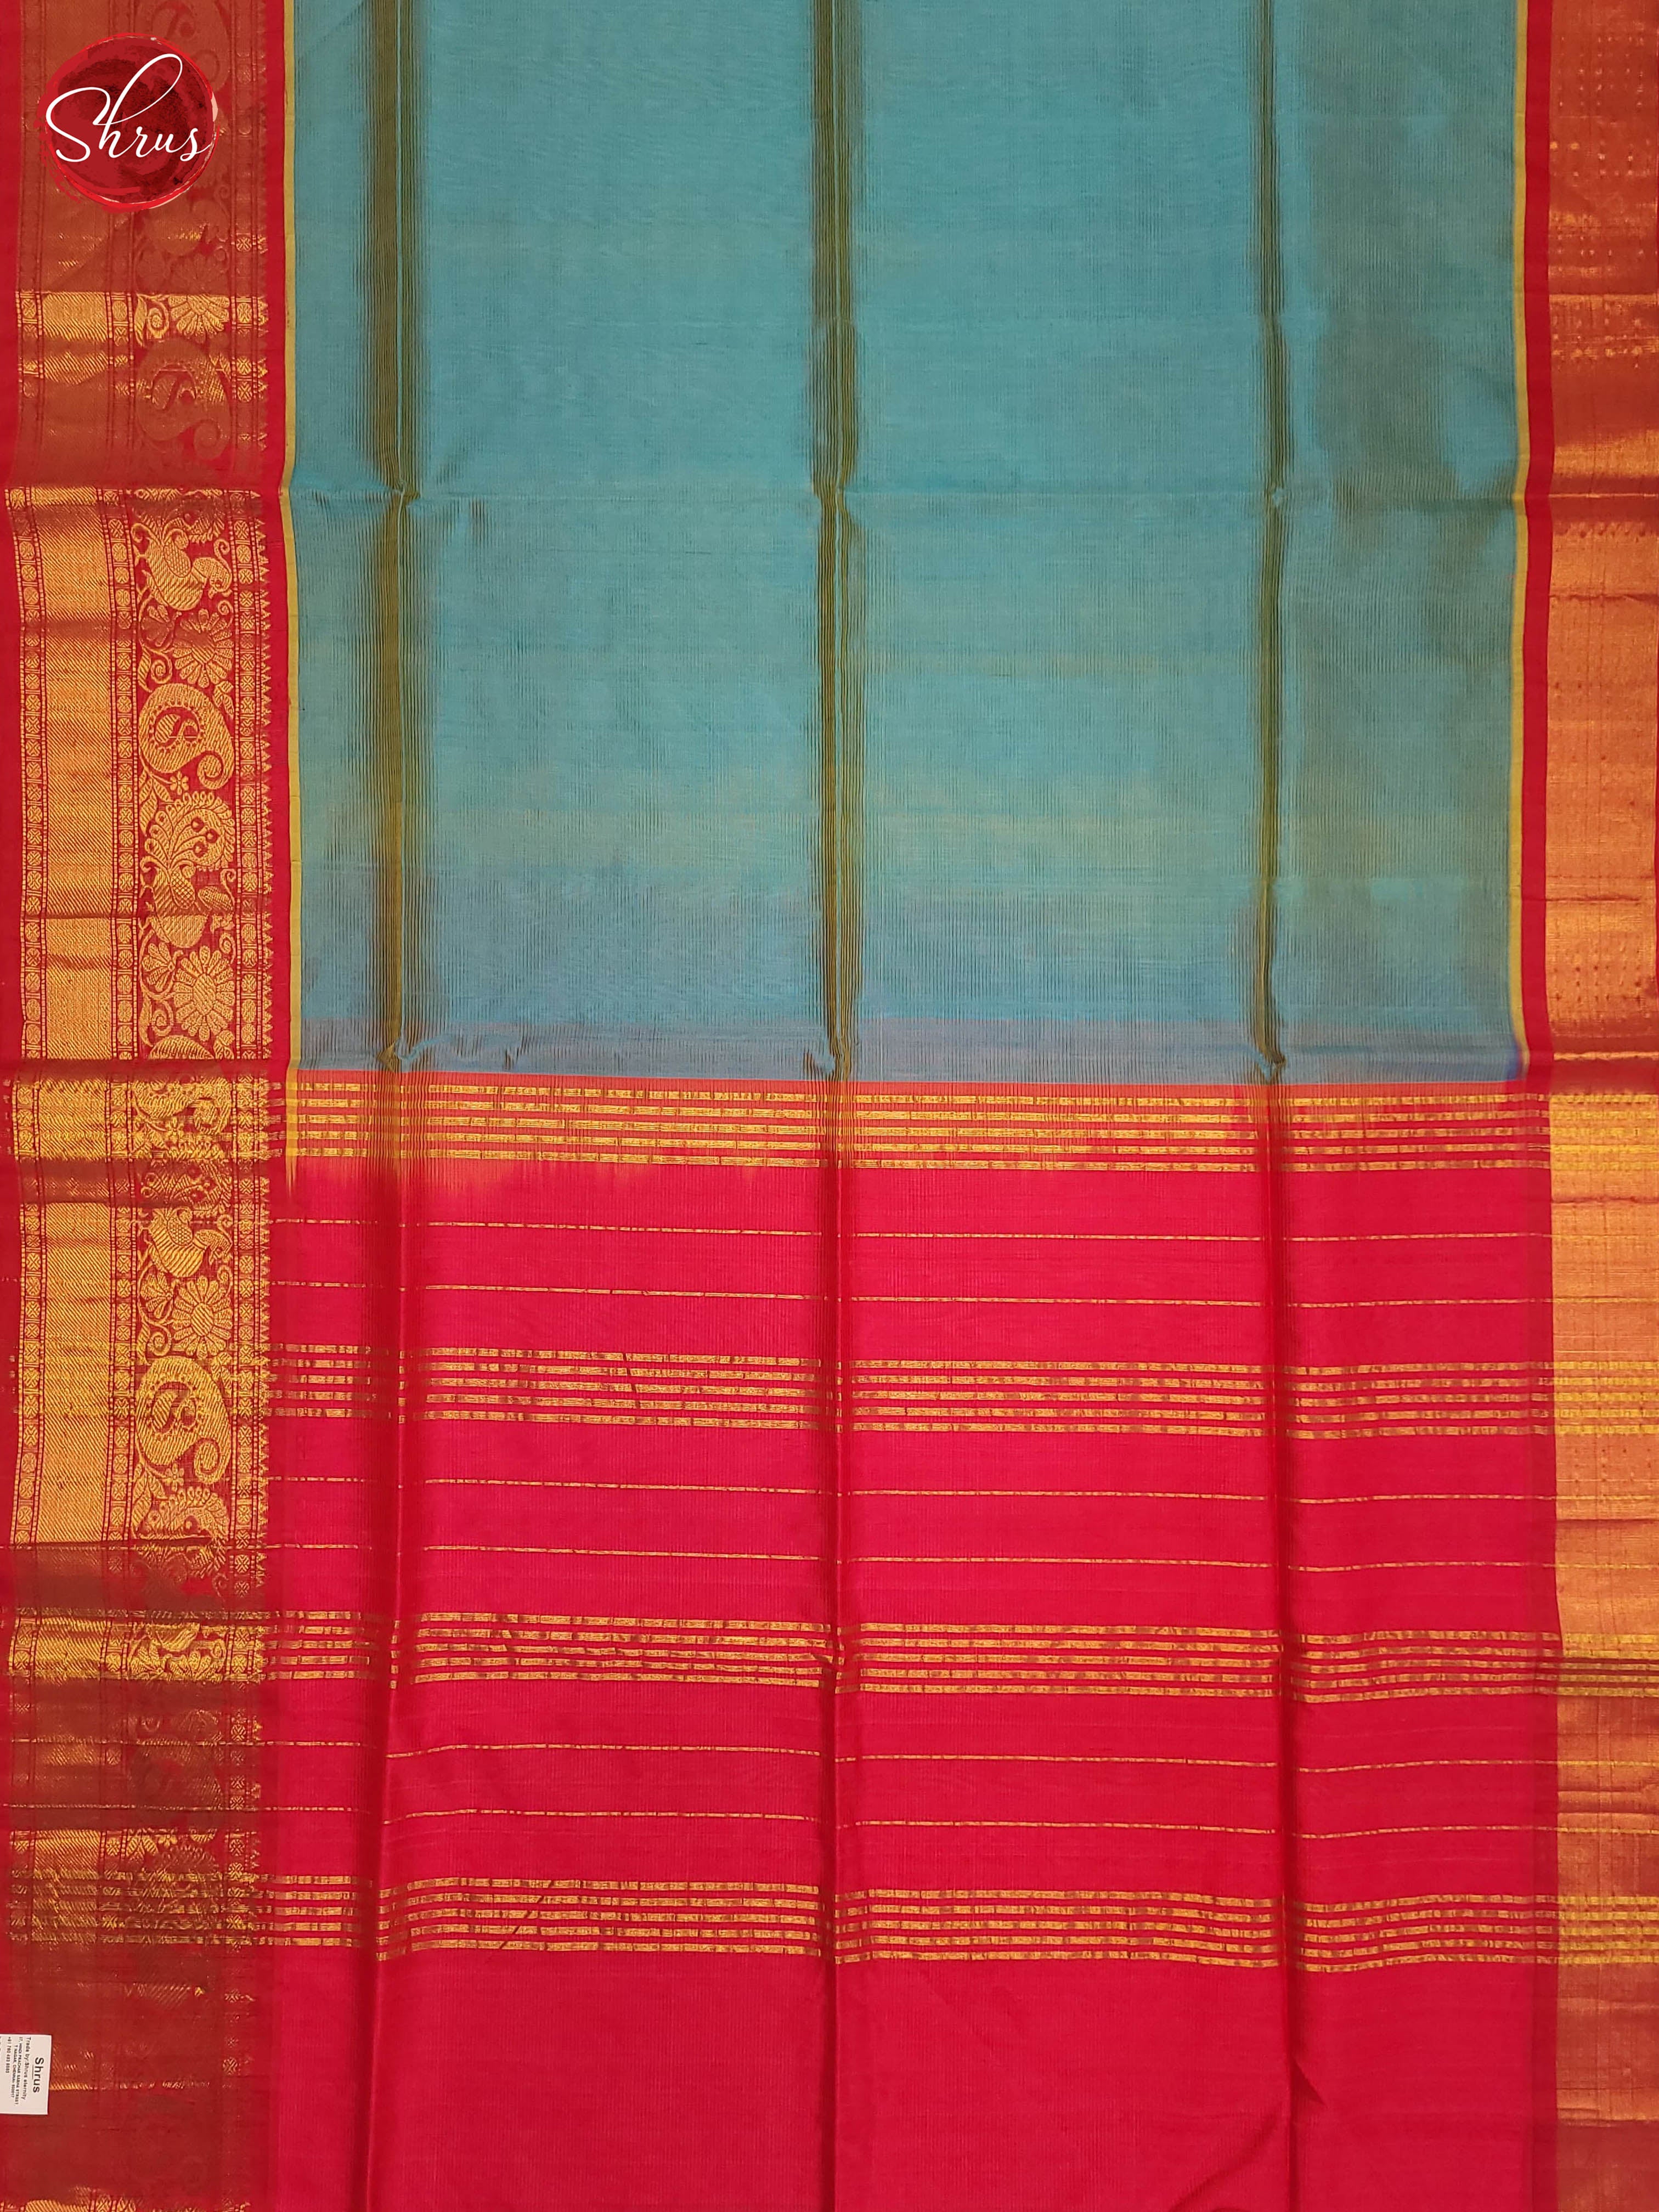 Double shaded Blue and Pink - Silk Cotton Saree - Shop on ShrusEternity.com